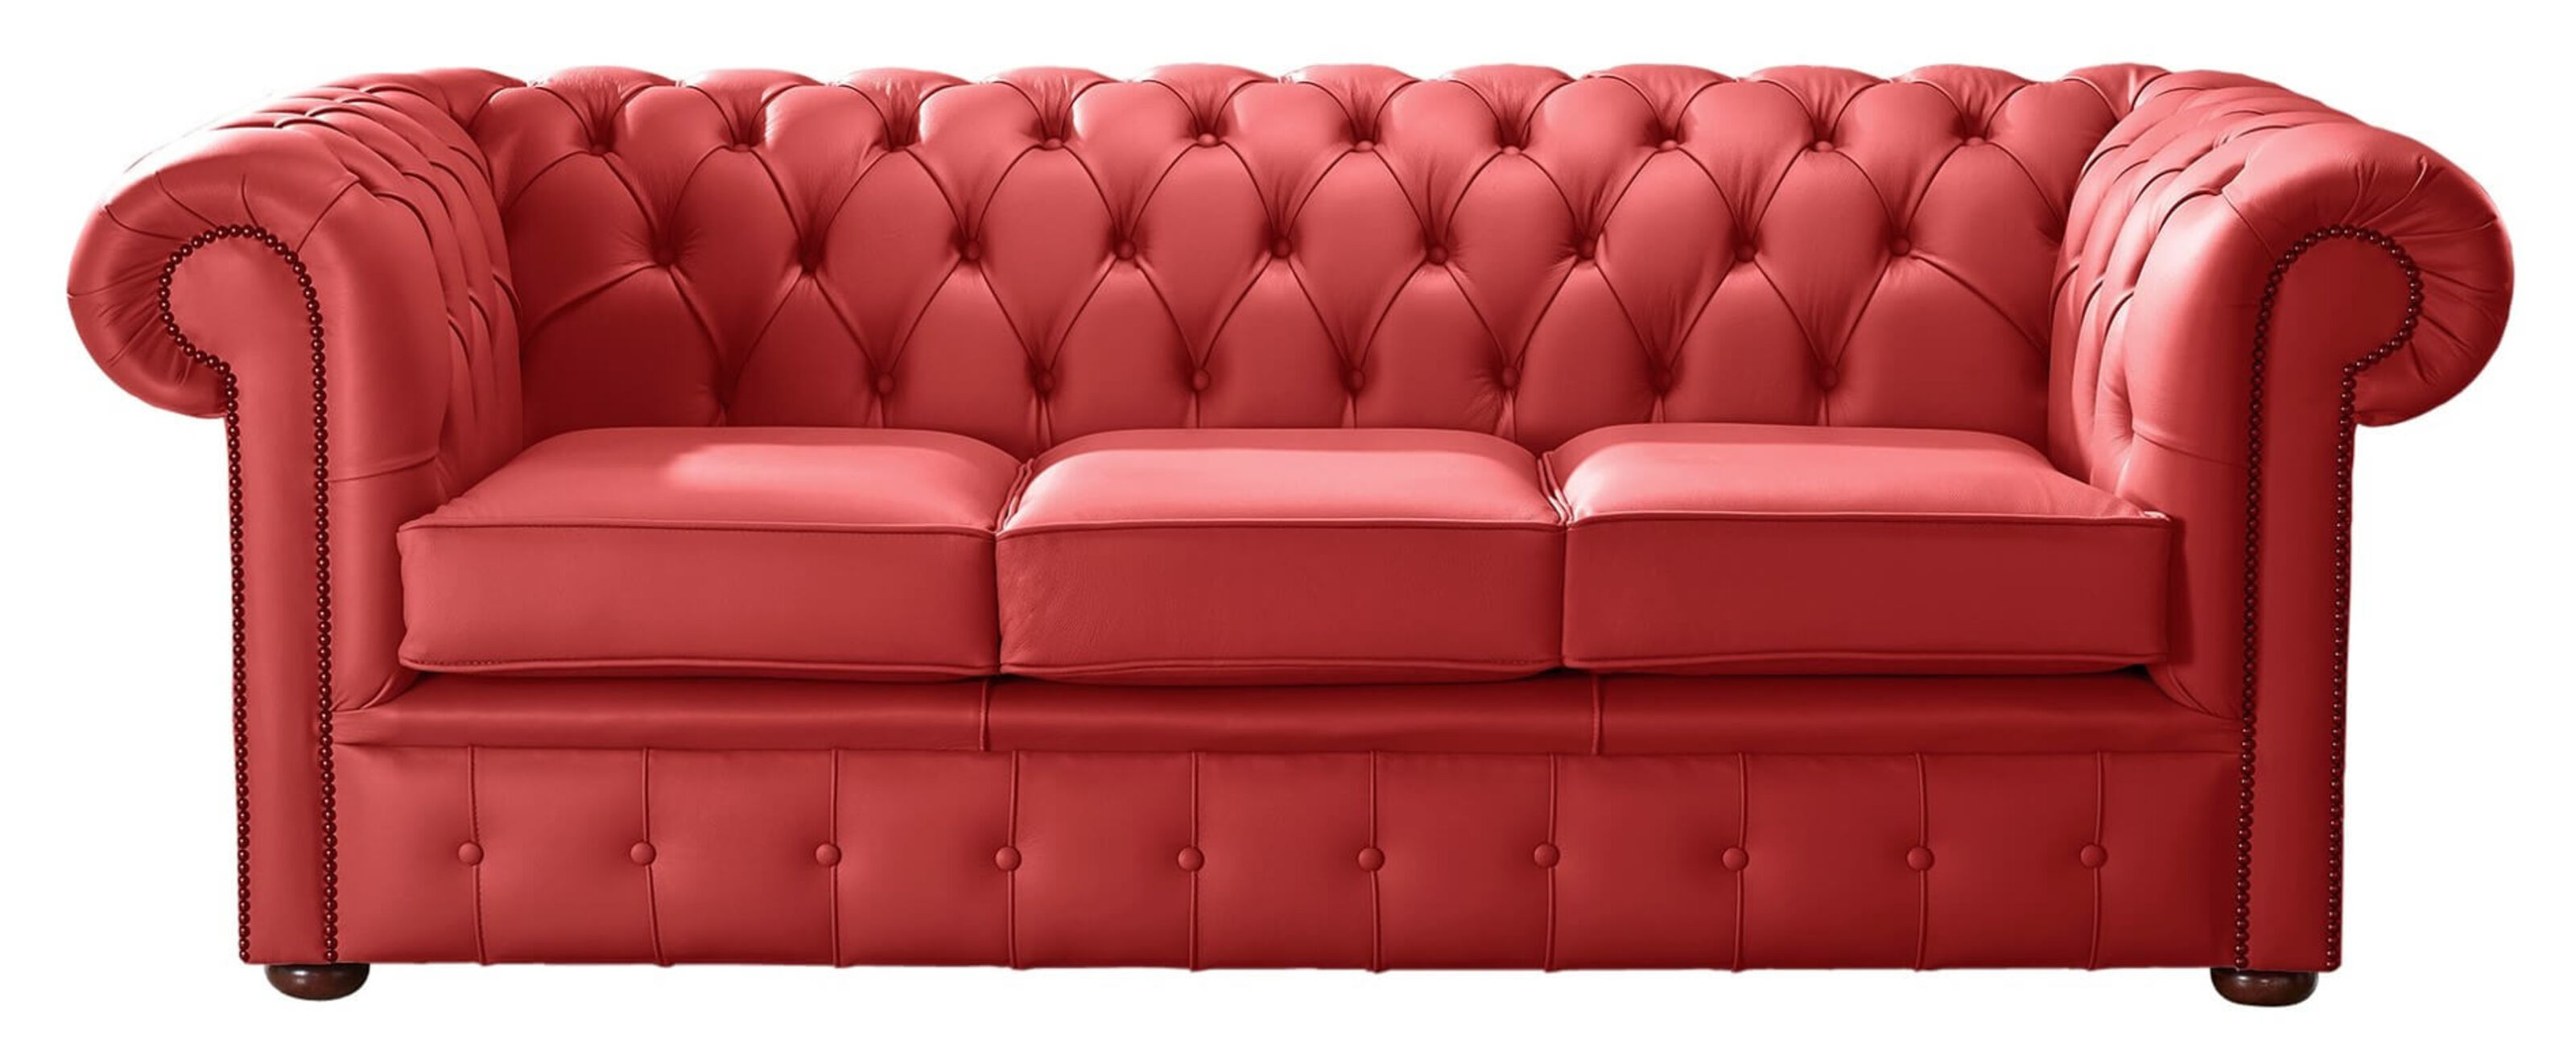 Transform Your Space with a Custom-Made Chesterfield Sofa  %Post Title